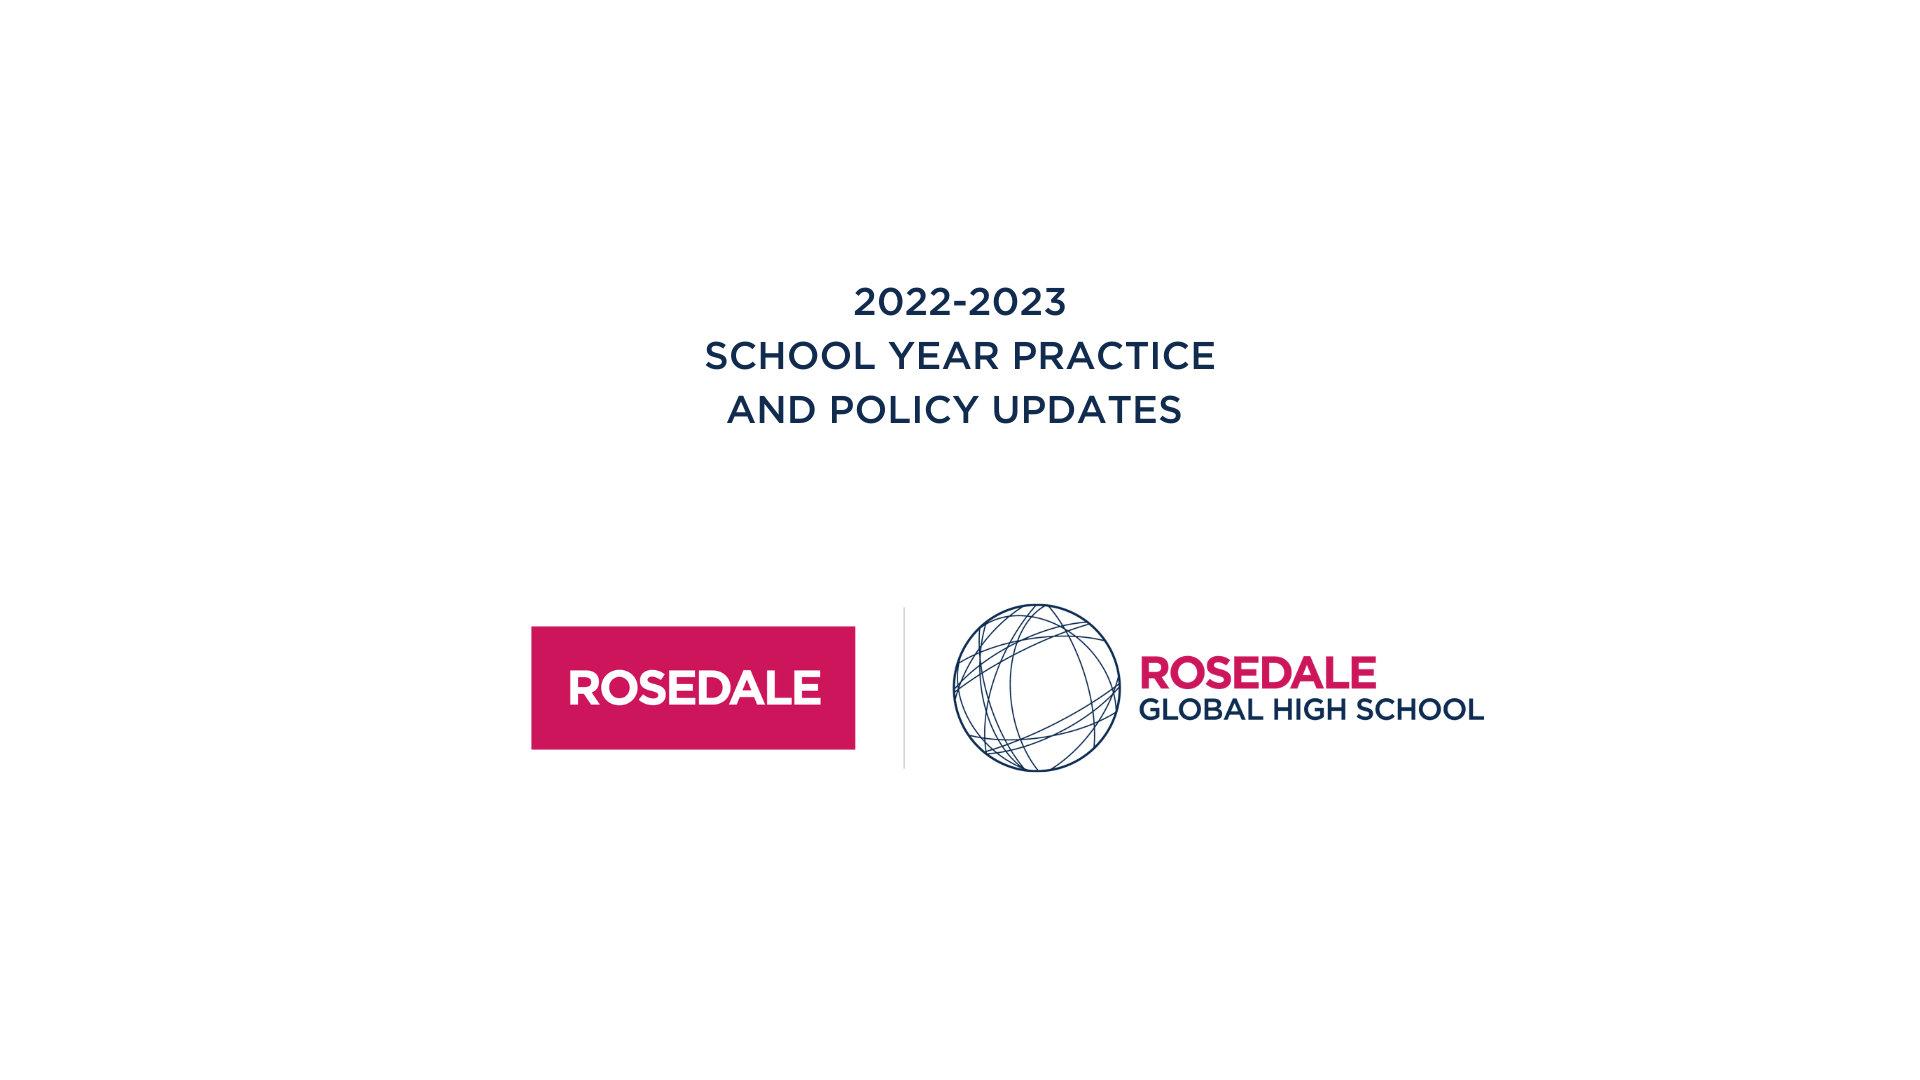 Focusing on improvement: Rosedale’s 2022-2023 school year practice and policy updates